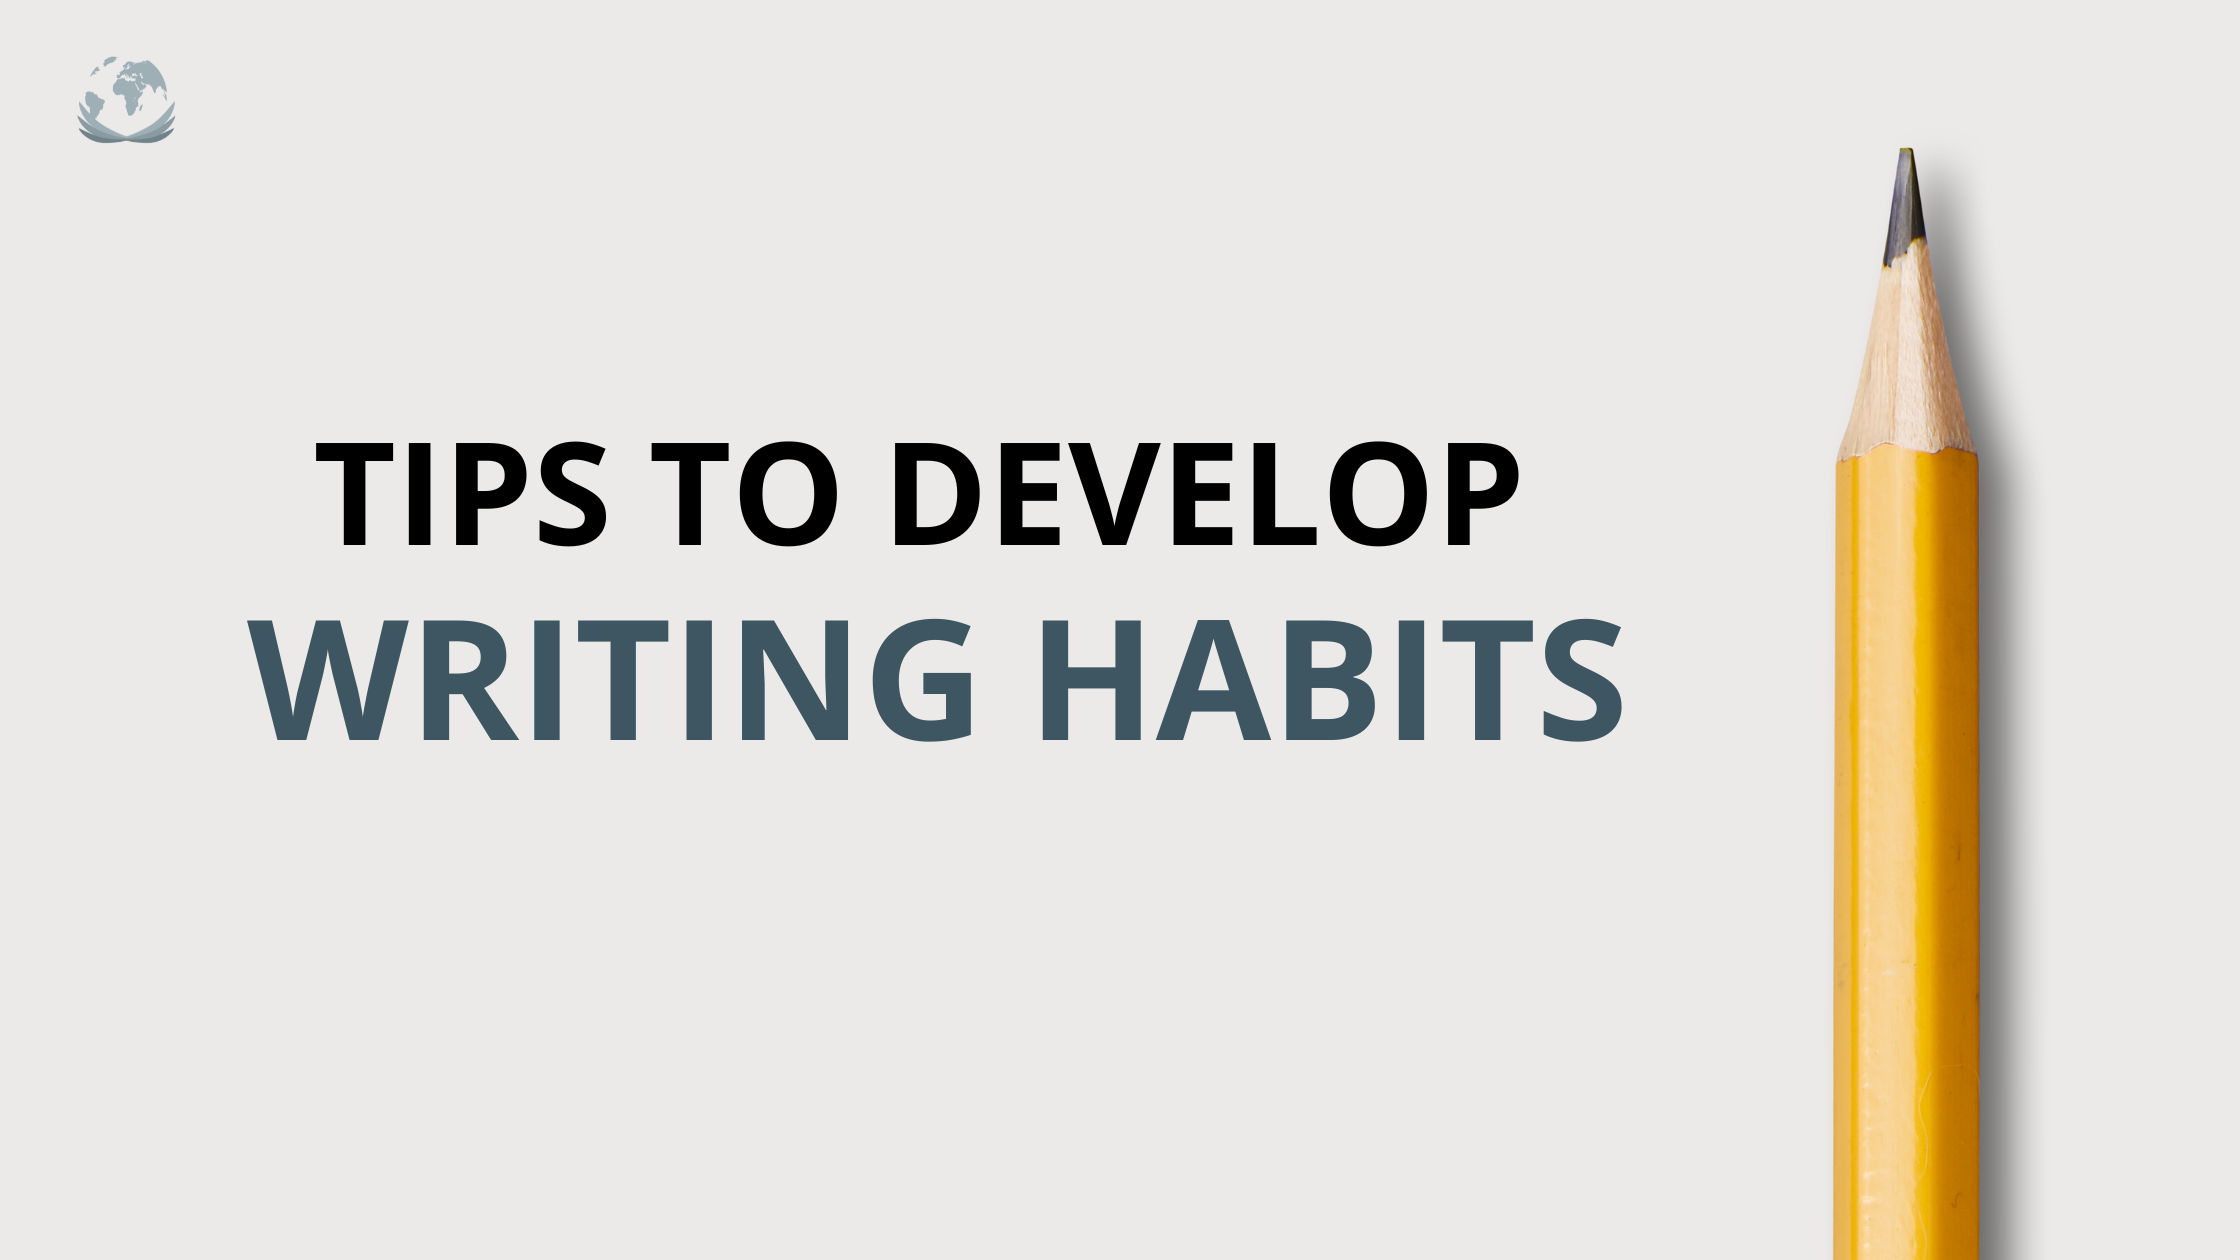 5 Tips to Develop Writing Habits